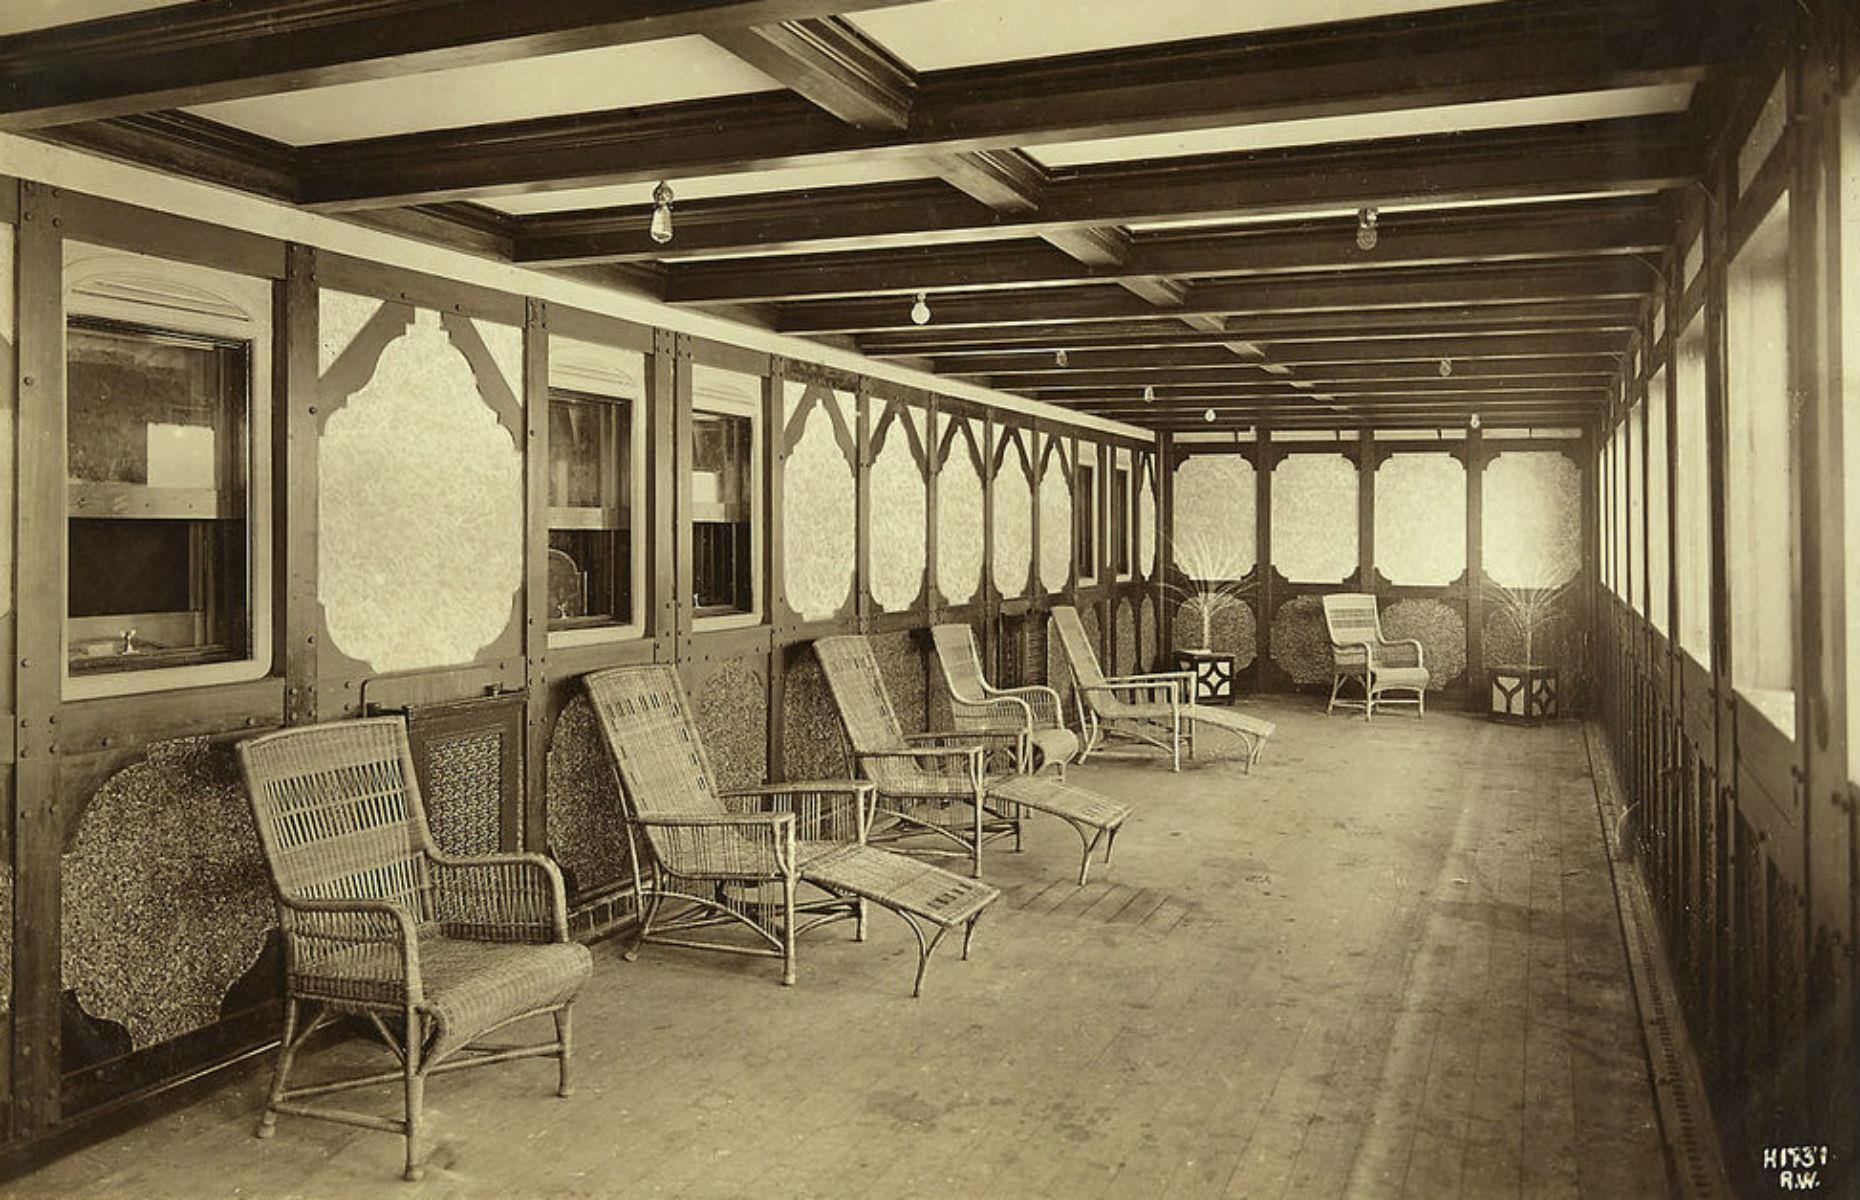 First class: staterooms